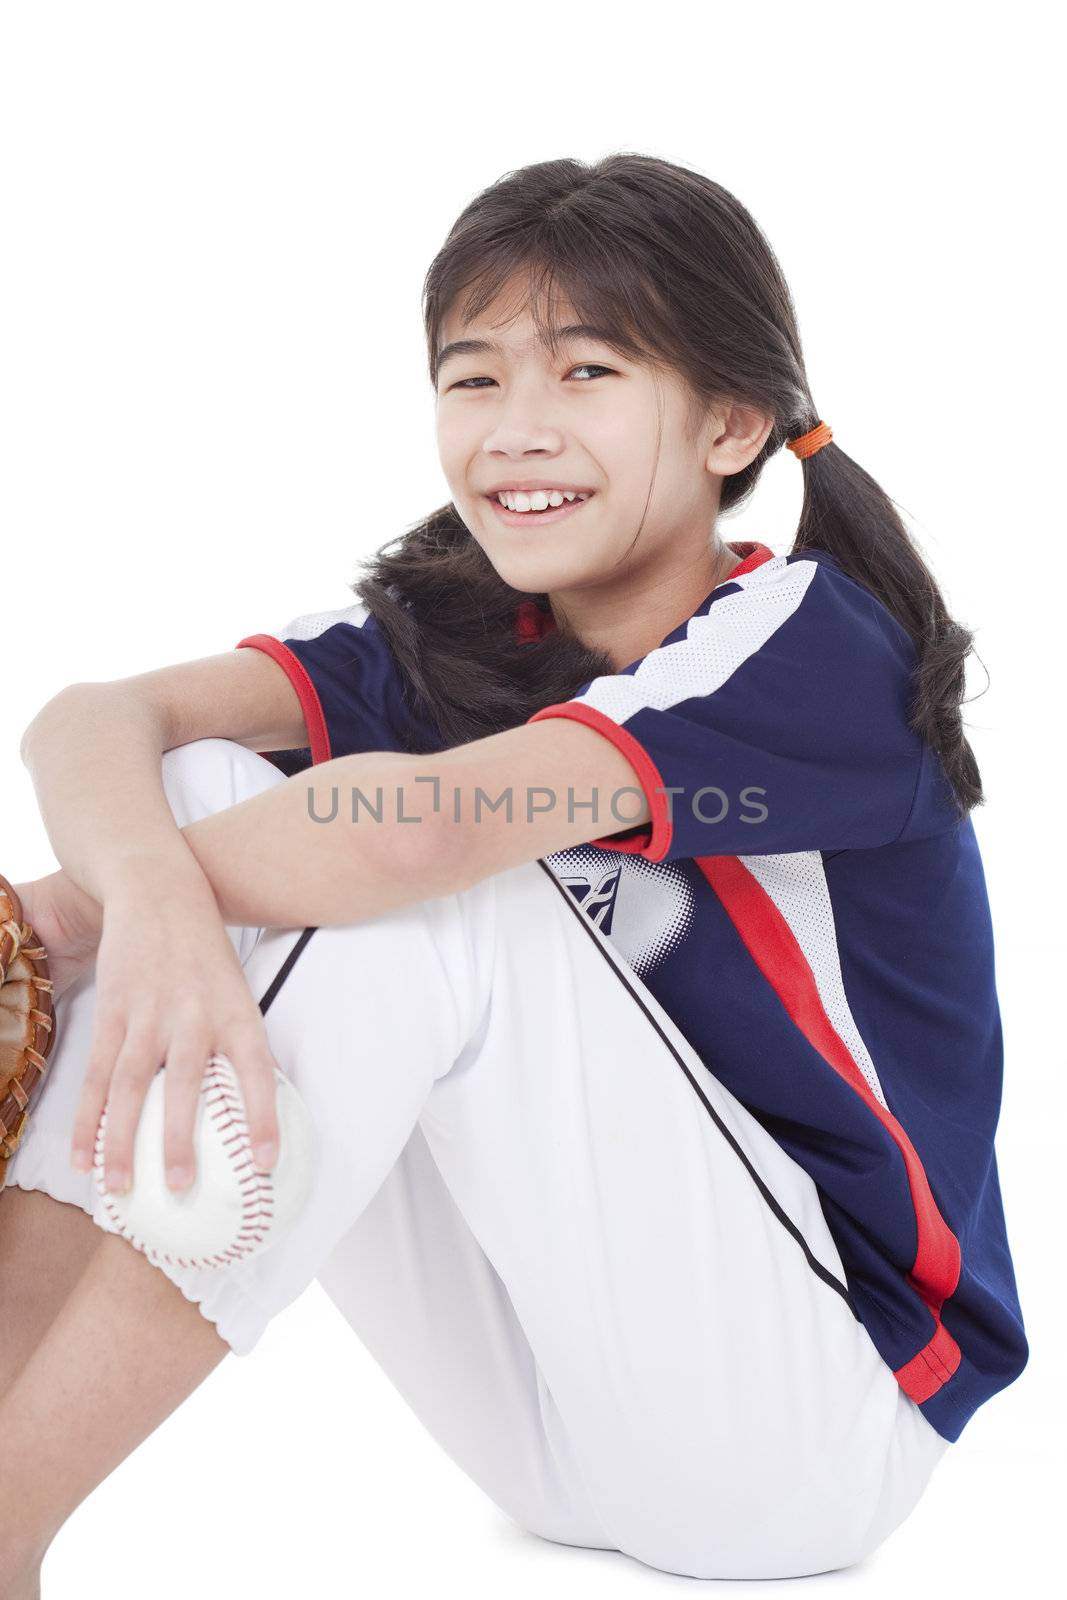 Biracial asian girl holding softball and glove while sitting, isolated